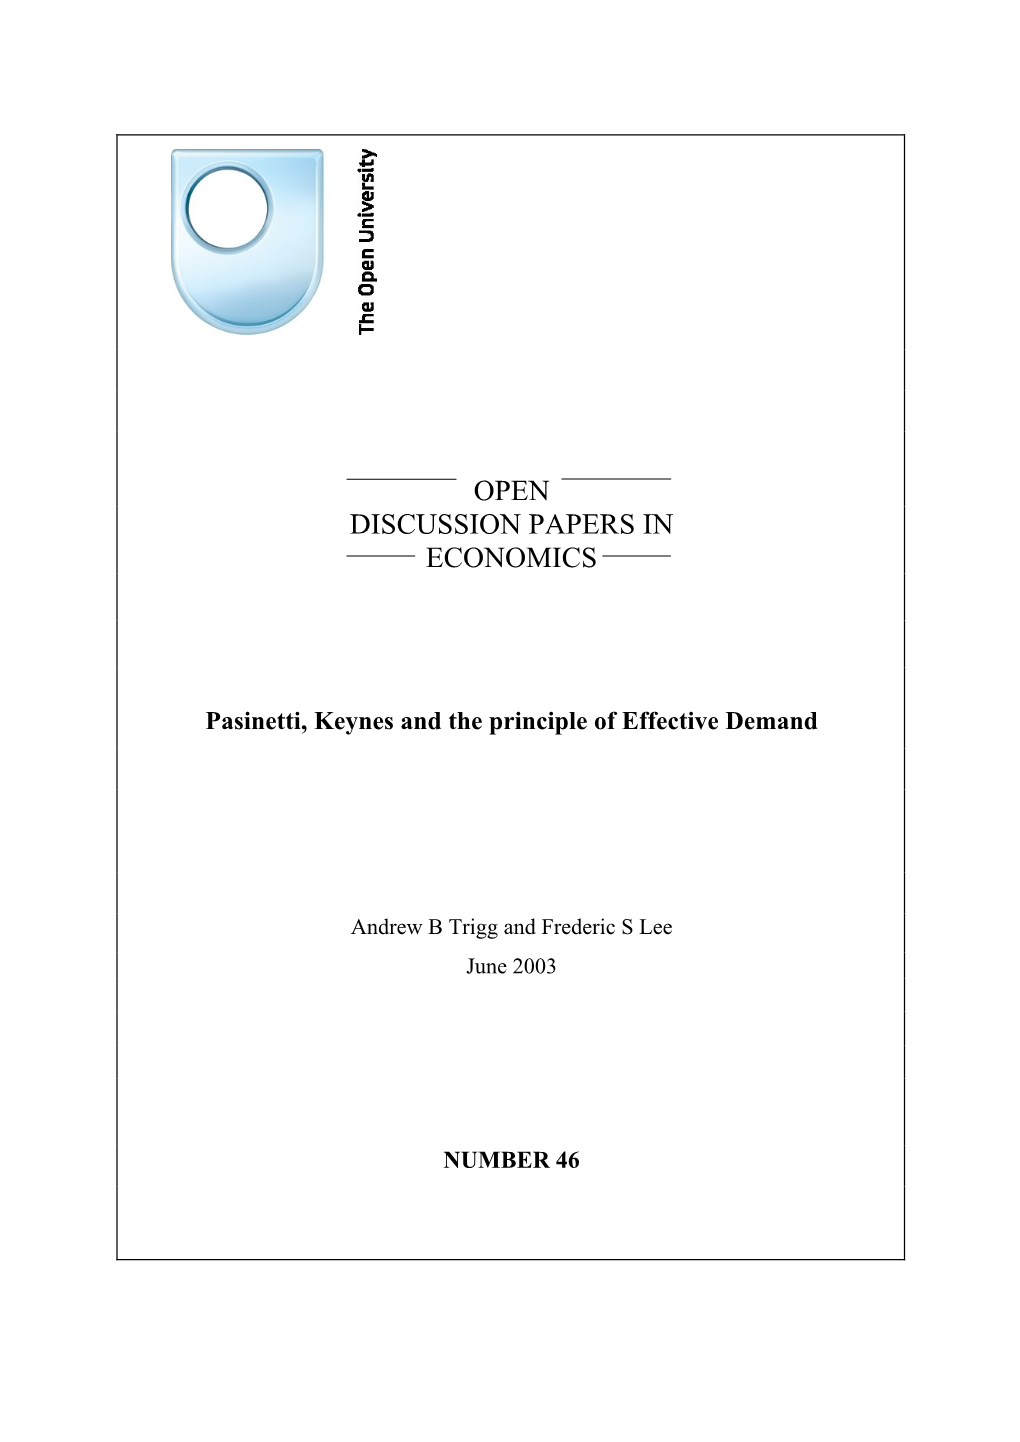 Open Discussion Papers in Economics